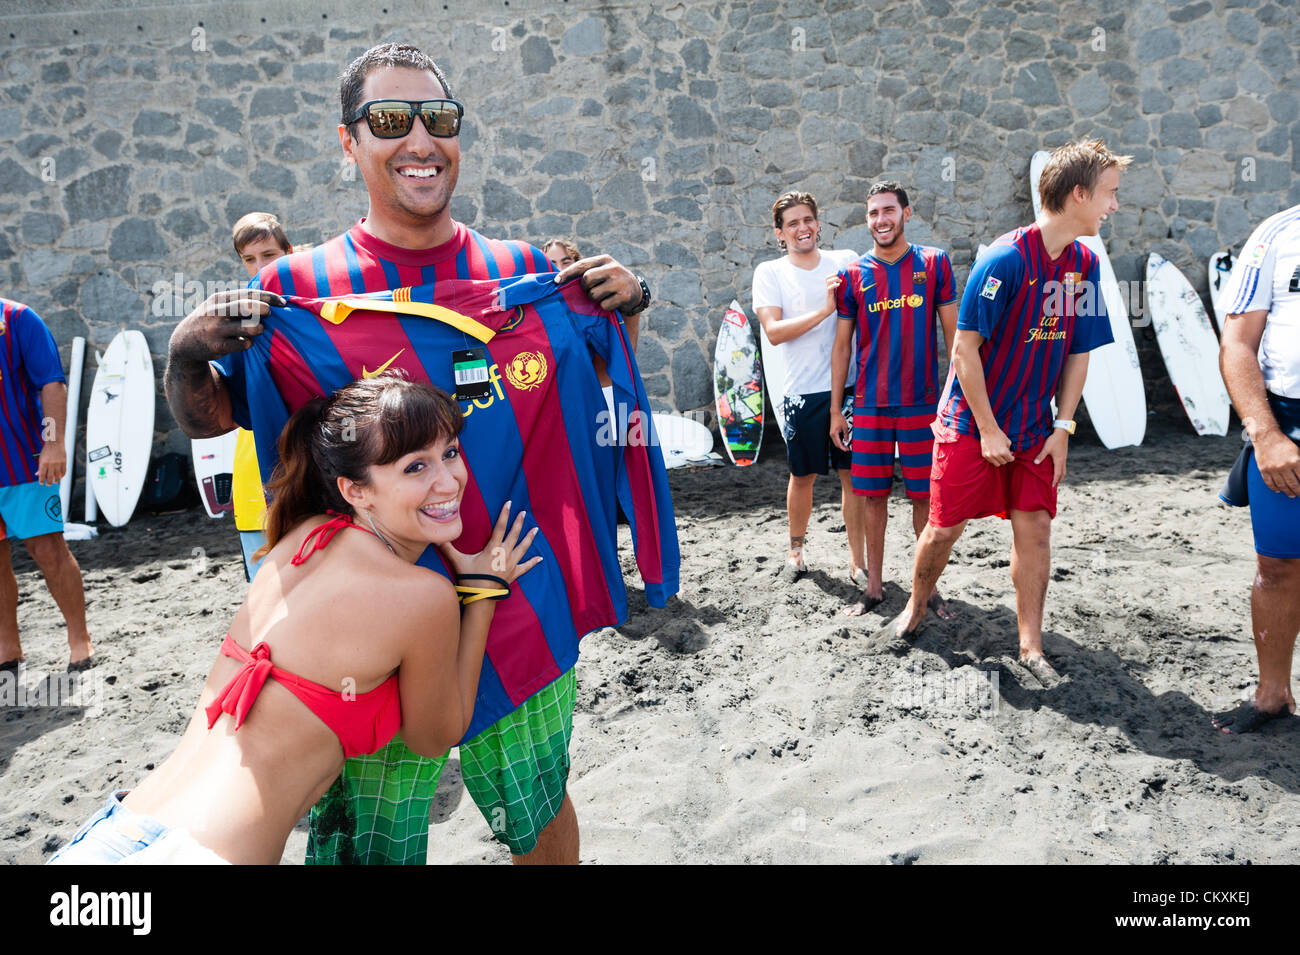 LAS PALMAS, CANARIAS ISLANDS, SPAIN–AUGUST 29, 2012: Unidentified young  surfers from University Surf School and Surf Camp Las Palmas during an  informal competition, formed as an football match with 11 surfers in